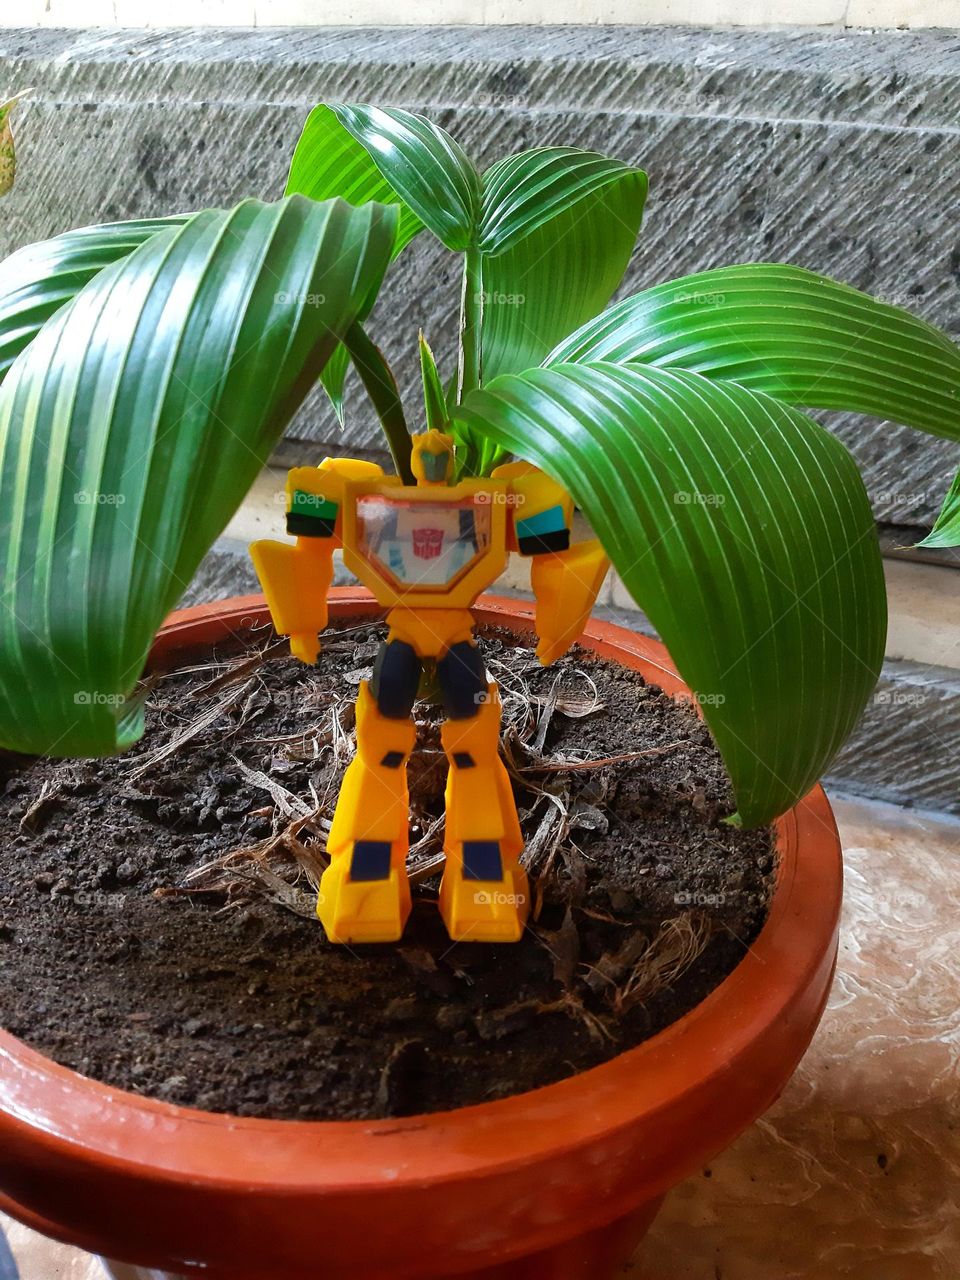 A mini yellowe plastic robot under the green leaves